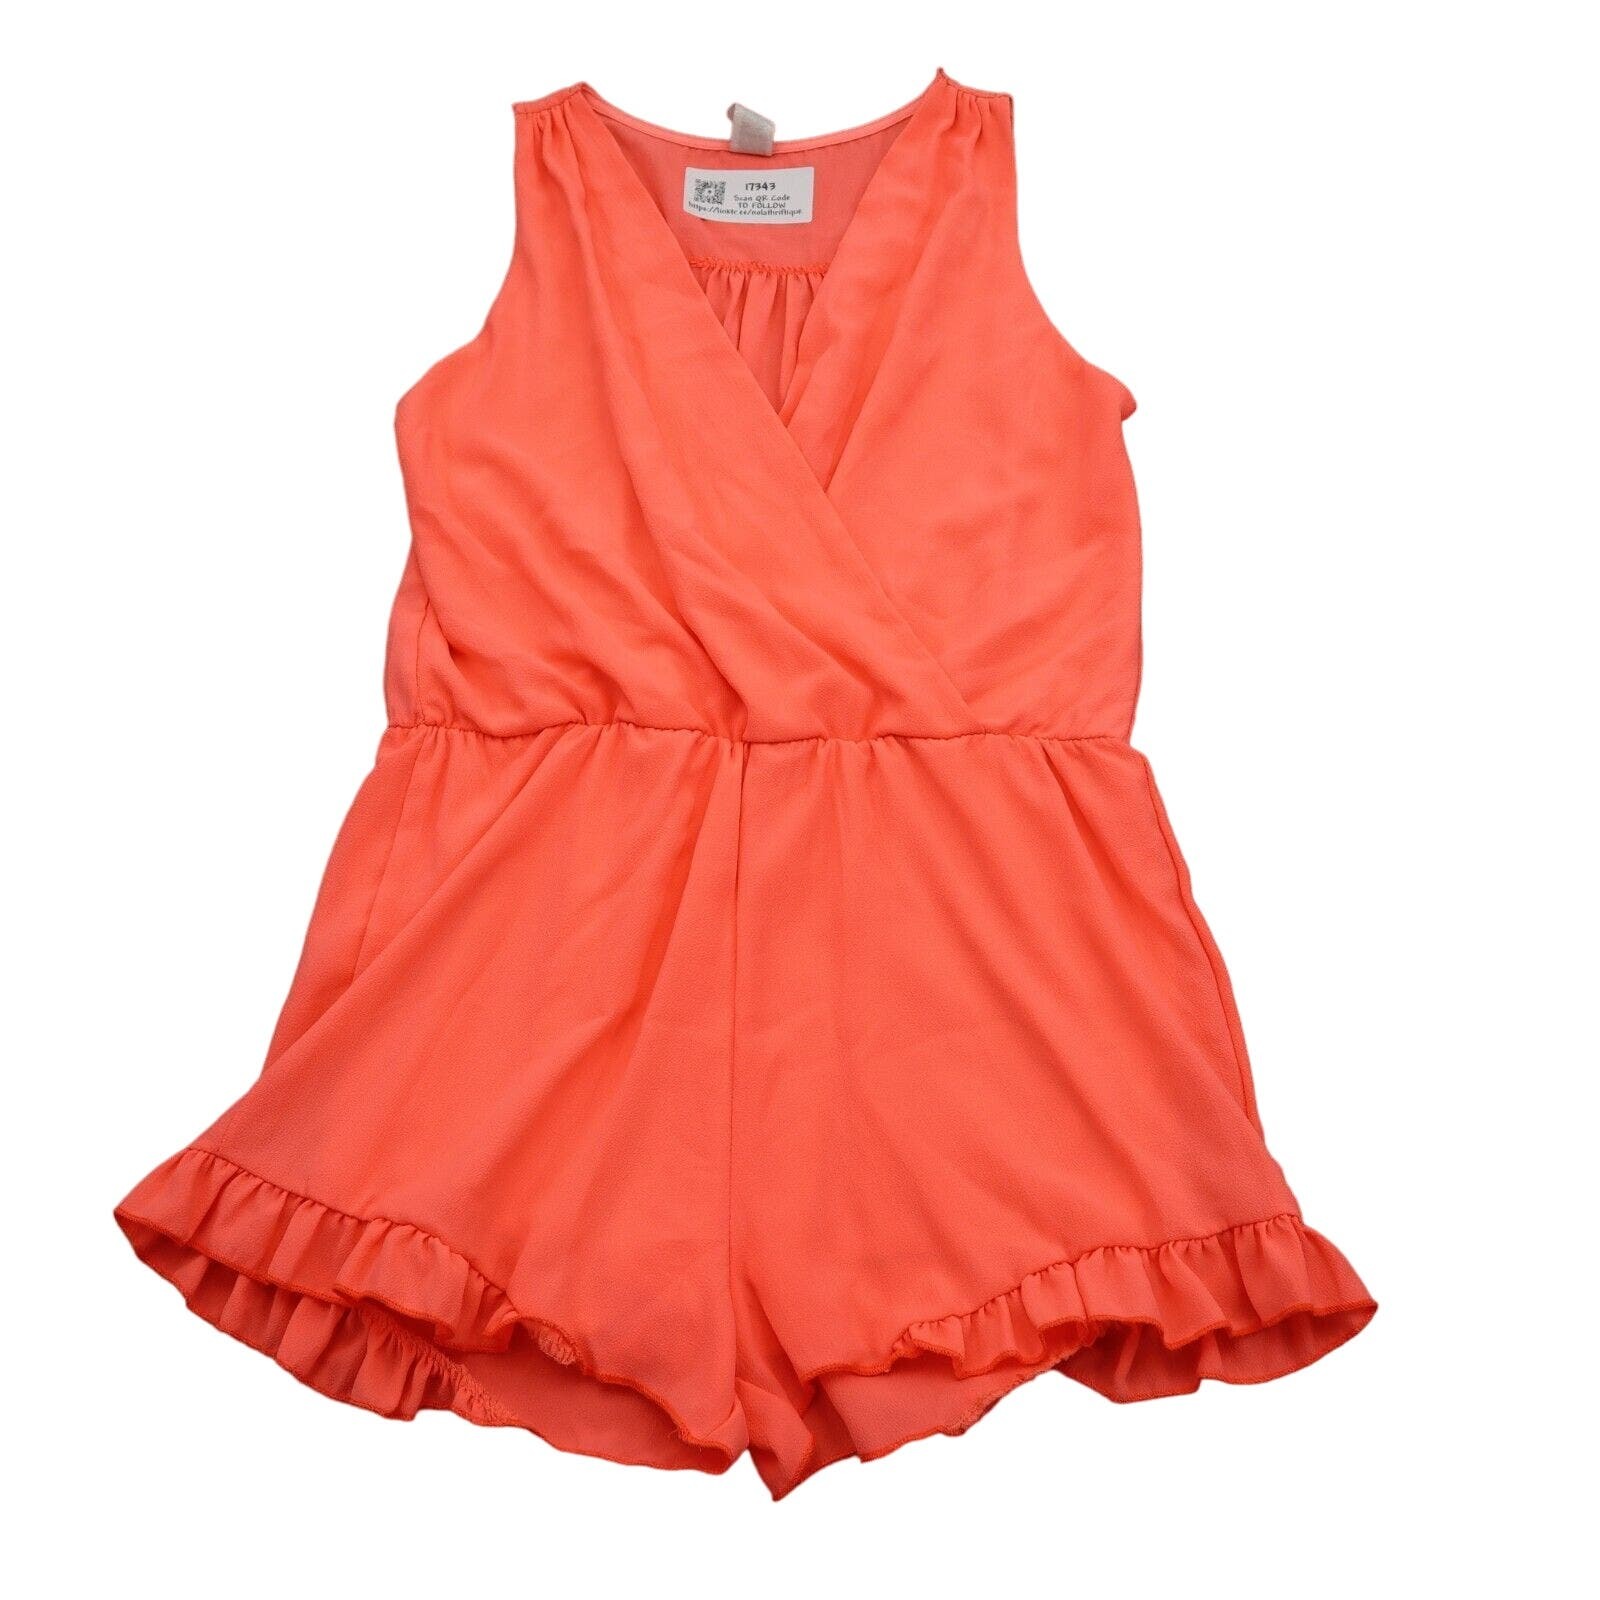 Primary image for Coco Avante Romper Womens S Orange Sleeveless V Neck Ruffled Hem Casual Outfit